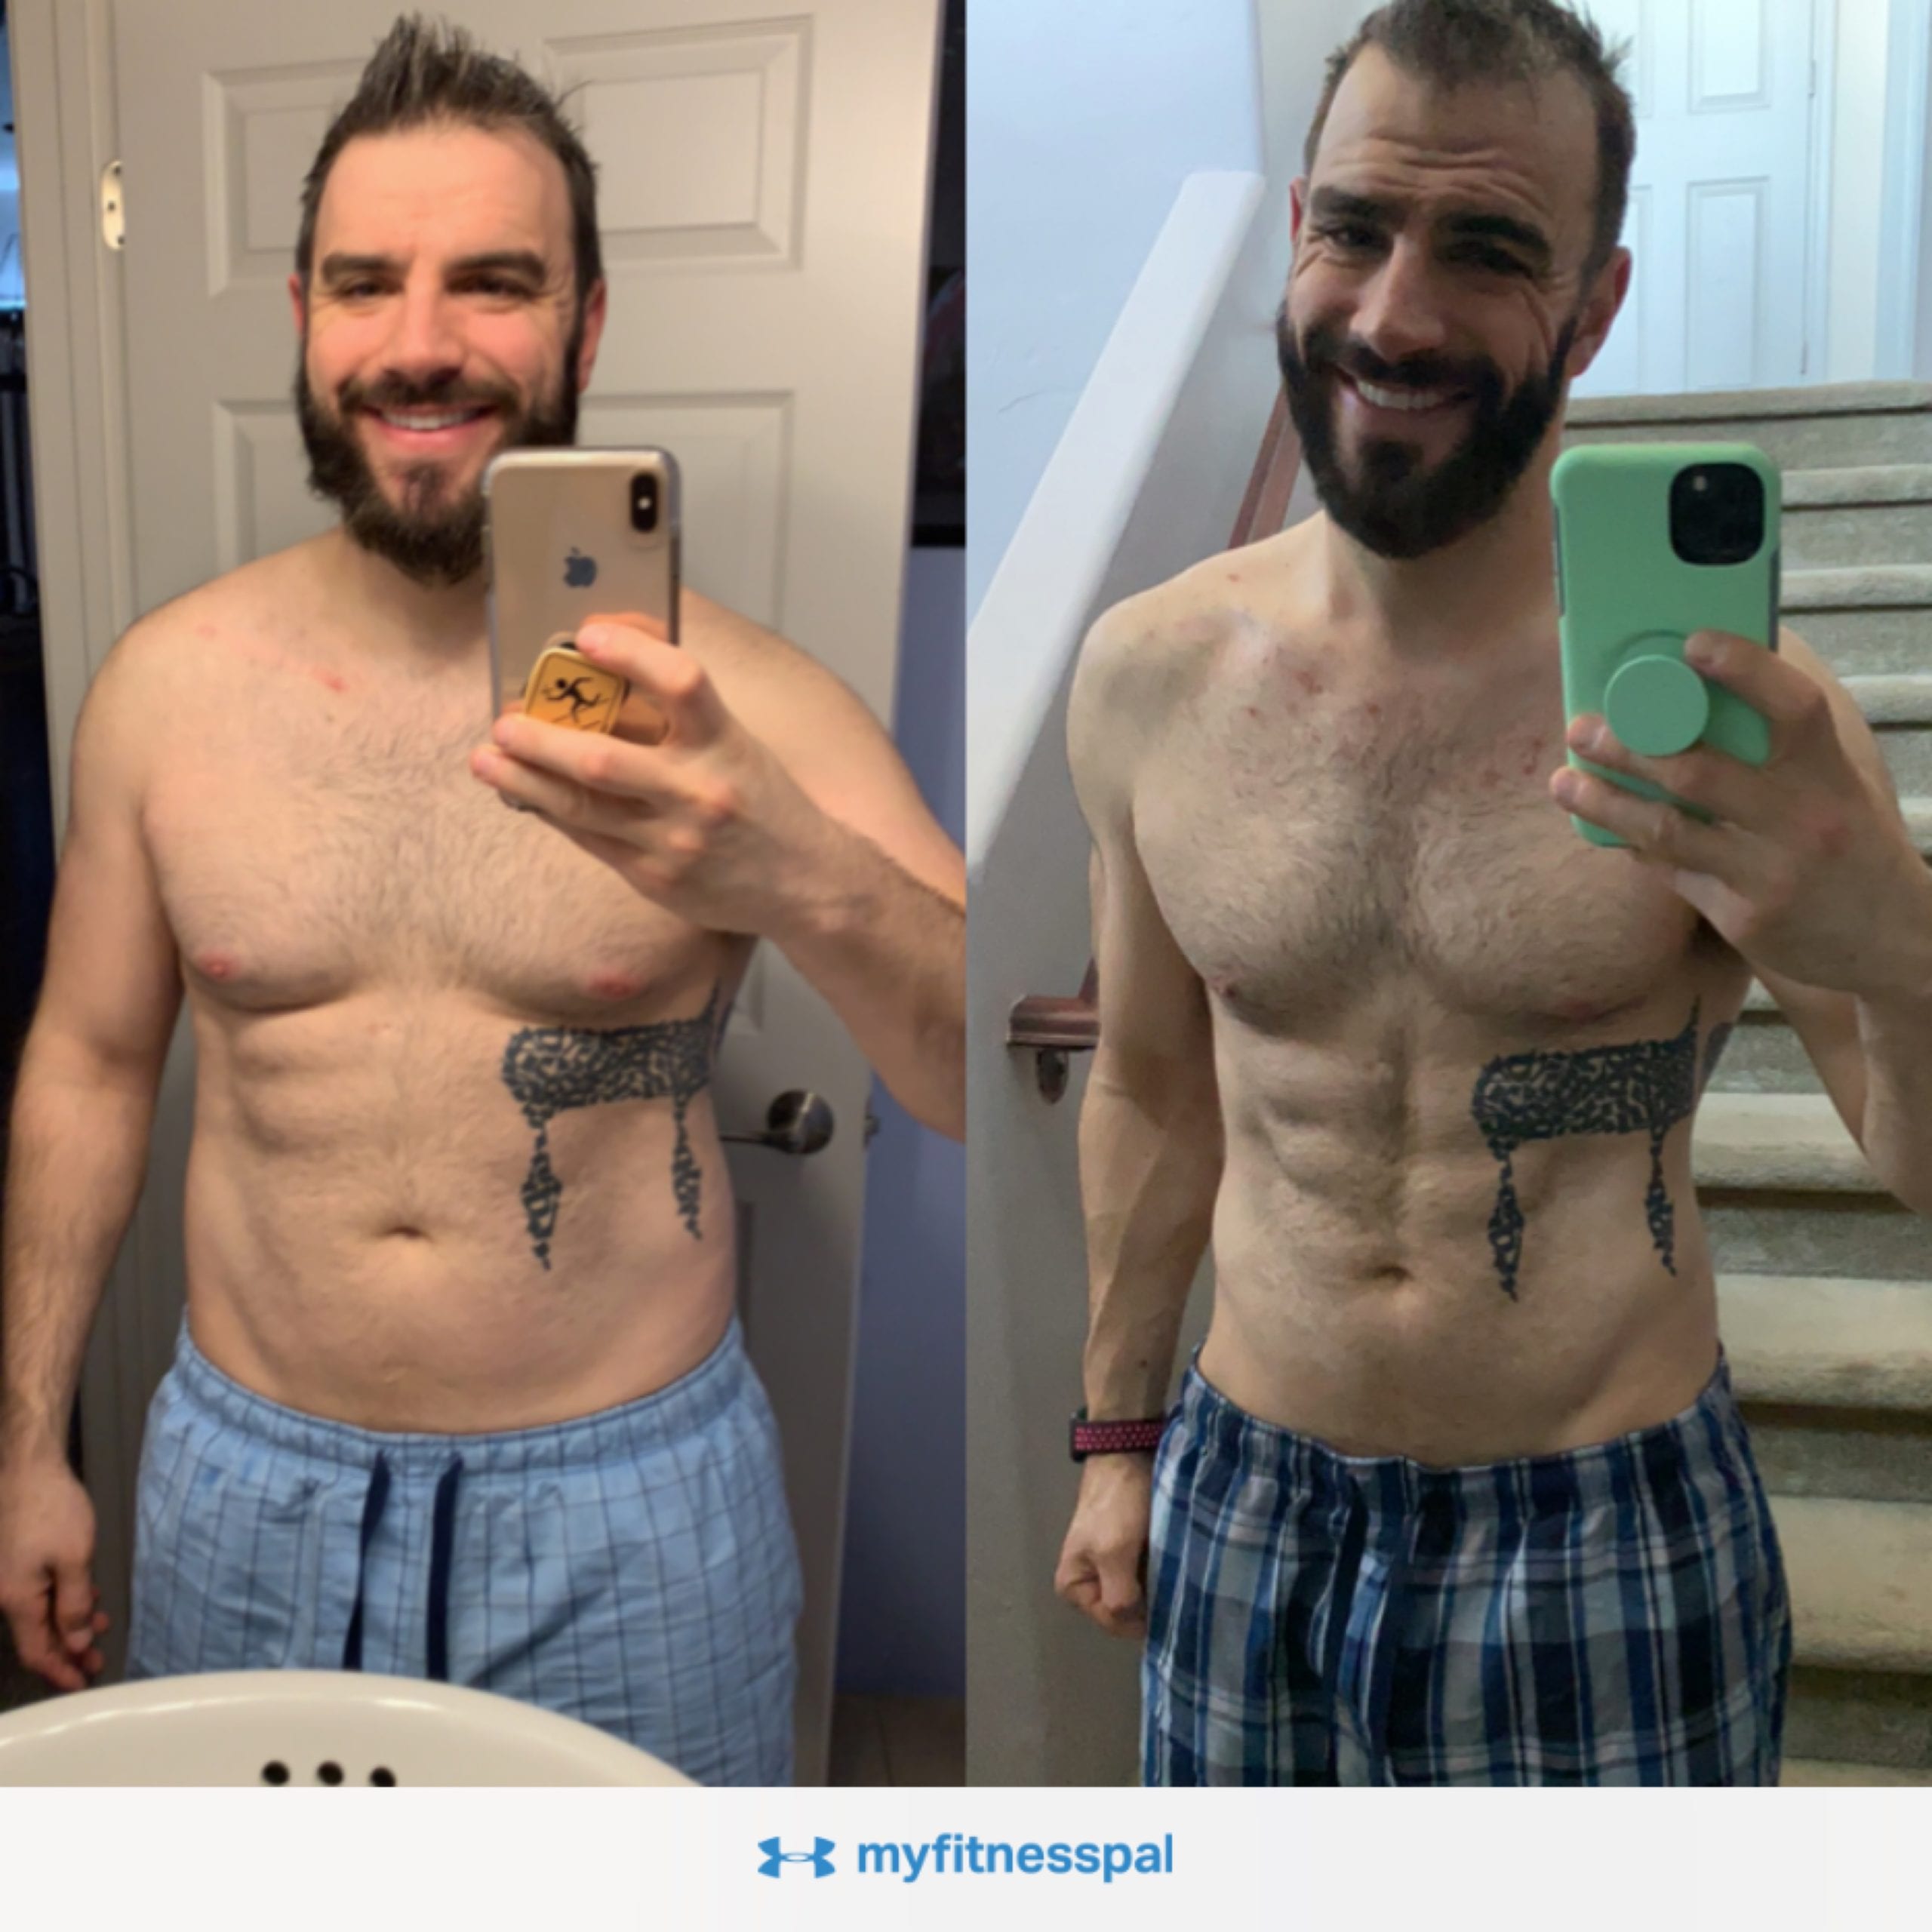 personal training and nutrition progress